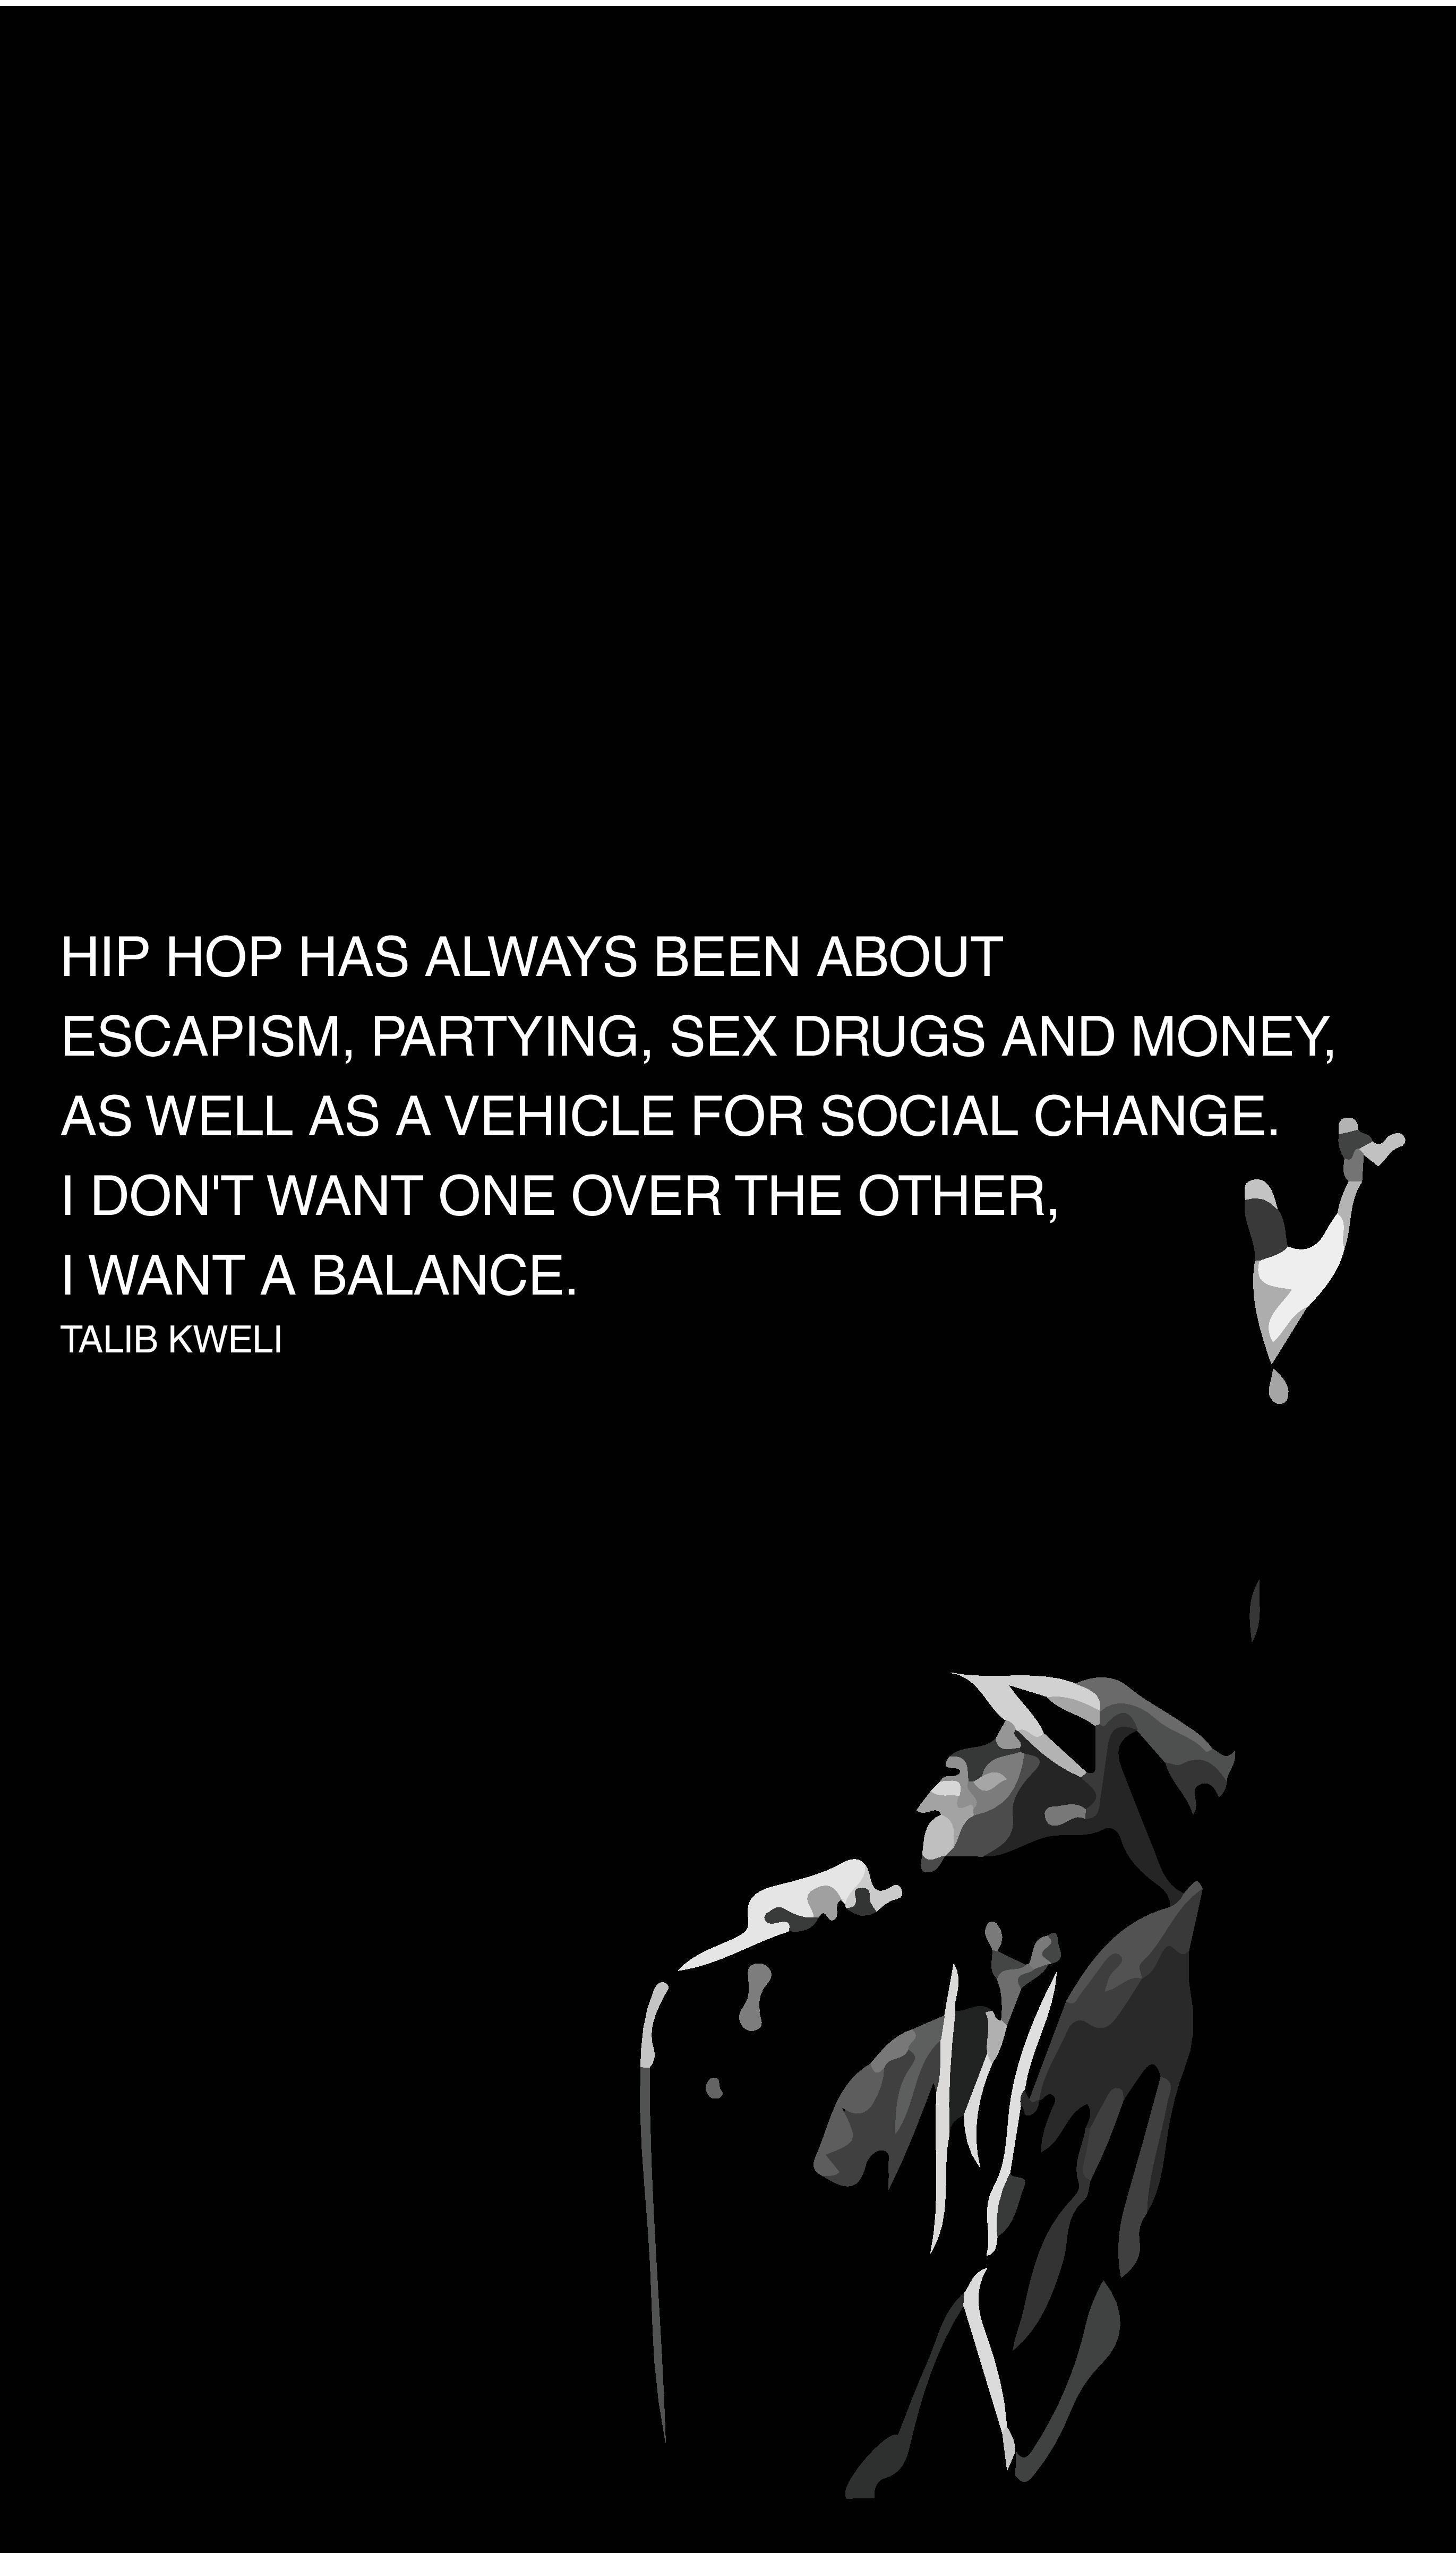 Pin by Hirok on Stuff to buy  Really cool wallpapers, Rap aesthetic, Hip  hop quotes